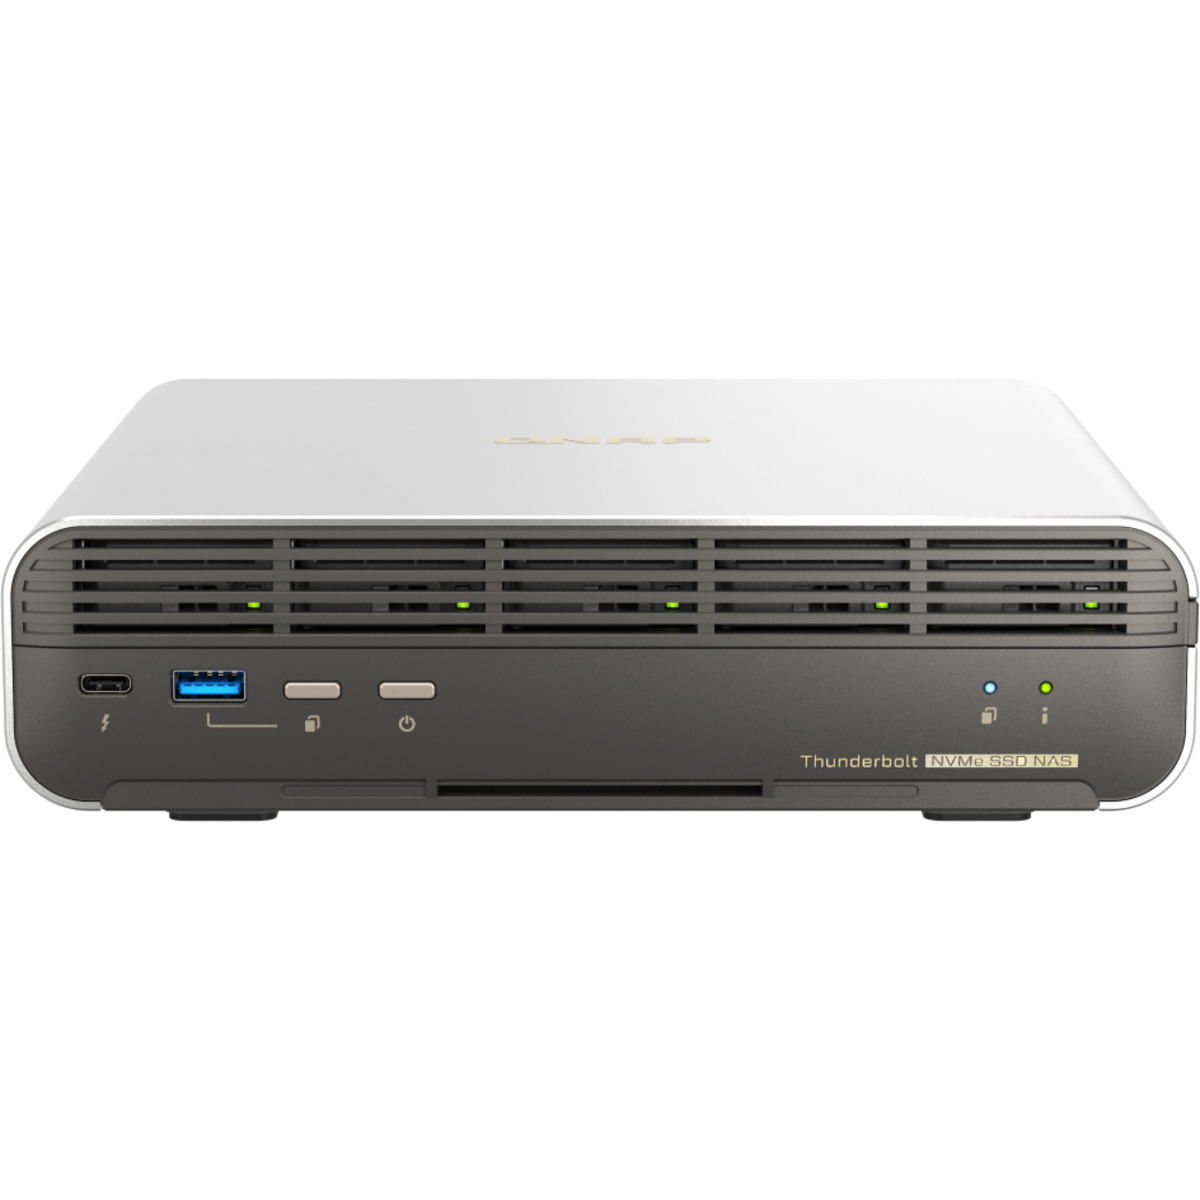 QNAP TBS-h574TX Core i5 Thunderbolt 4 10tb 5-Bay Desktop Multimedia / Power User / Business DAS-NAS - Combo Direct + Network Storage Device 5x2tb Samsung 990 EVO MZ-V9E2T0BW  5000/4200MB/s M.2 2280 NVMe SSD CONSUMER Class Drives Installed - Burn-In Tested TBS-h574TX Core i5 Thunderbolt 4